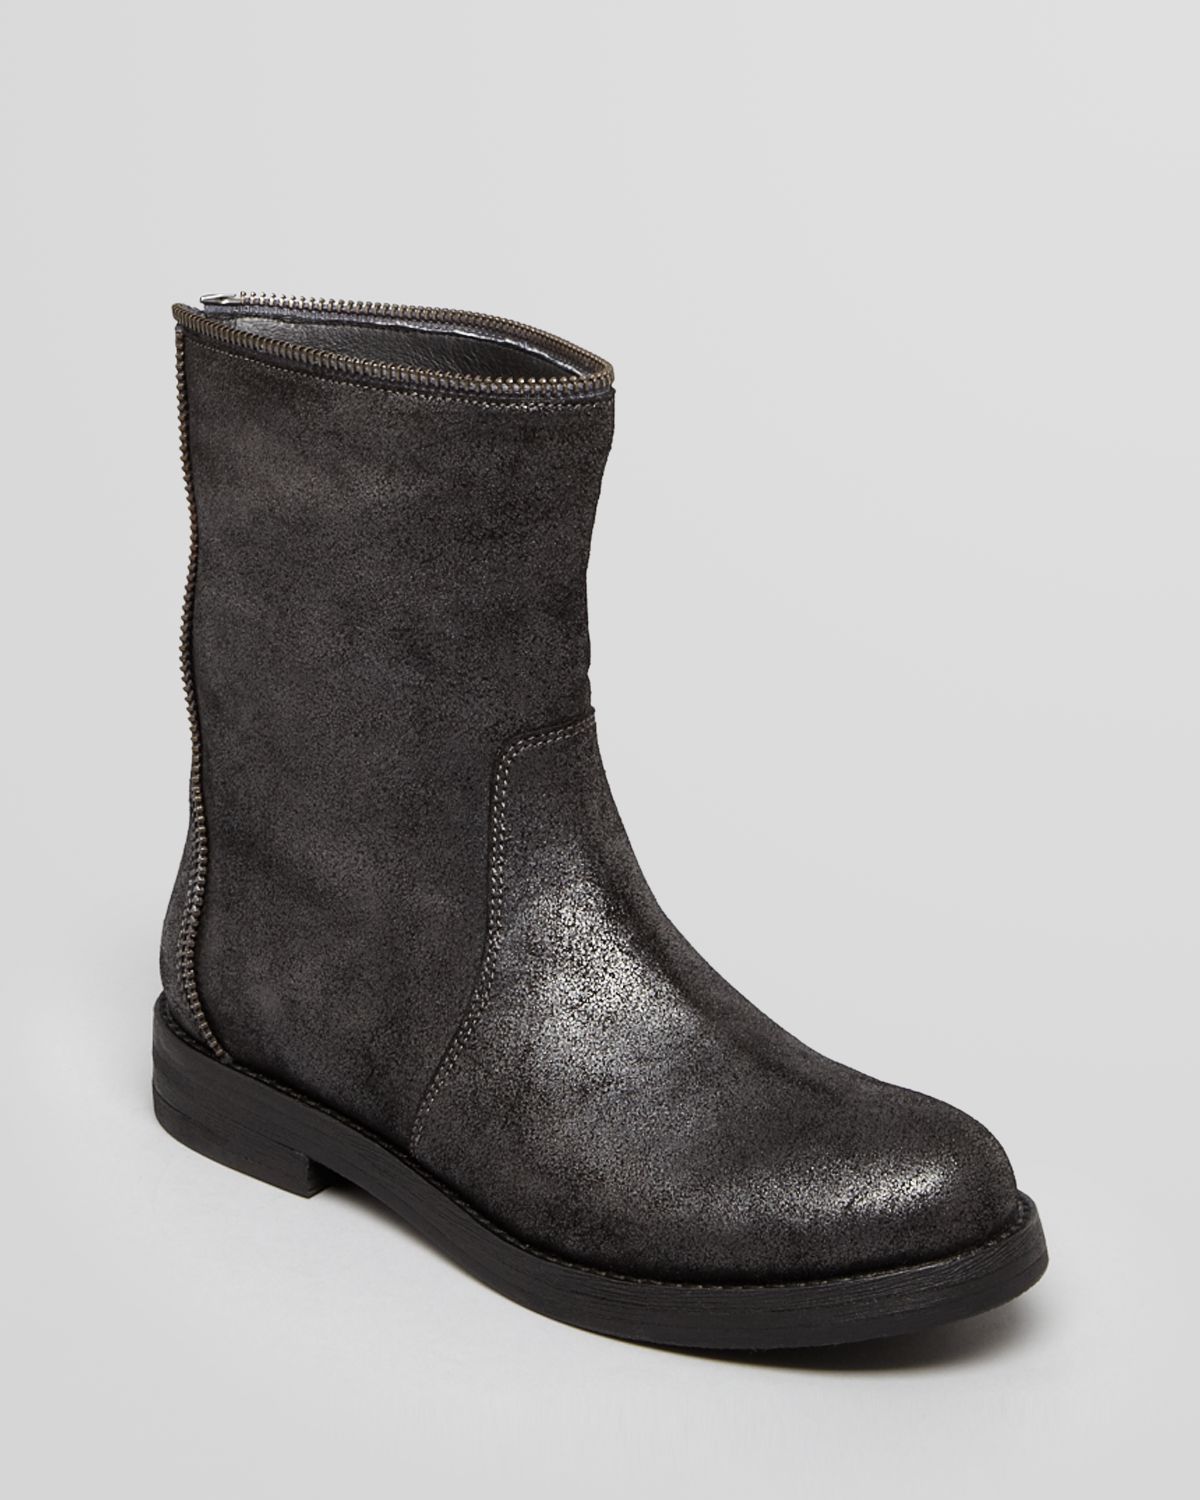 Eileen fisher Boots Switch Convertible in Black Lyst